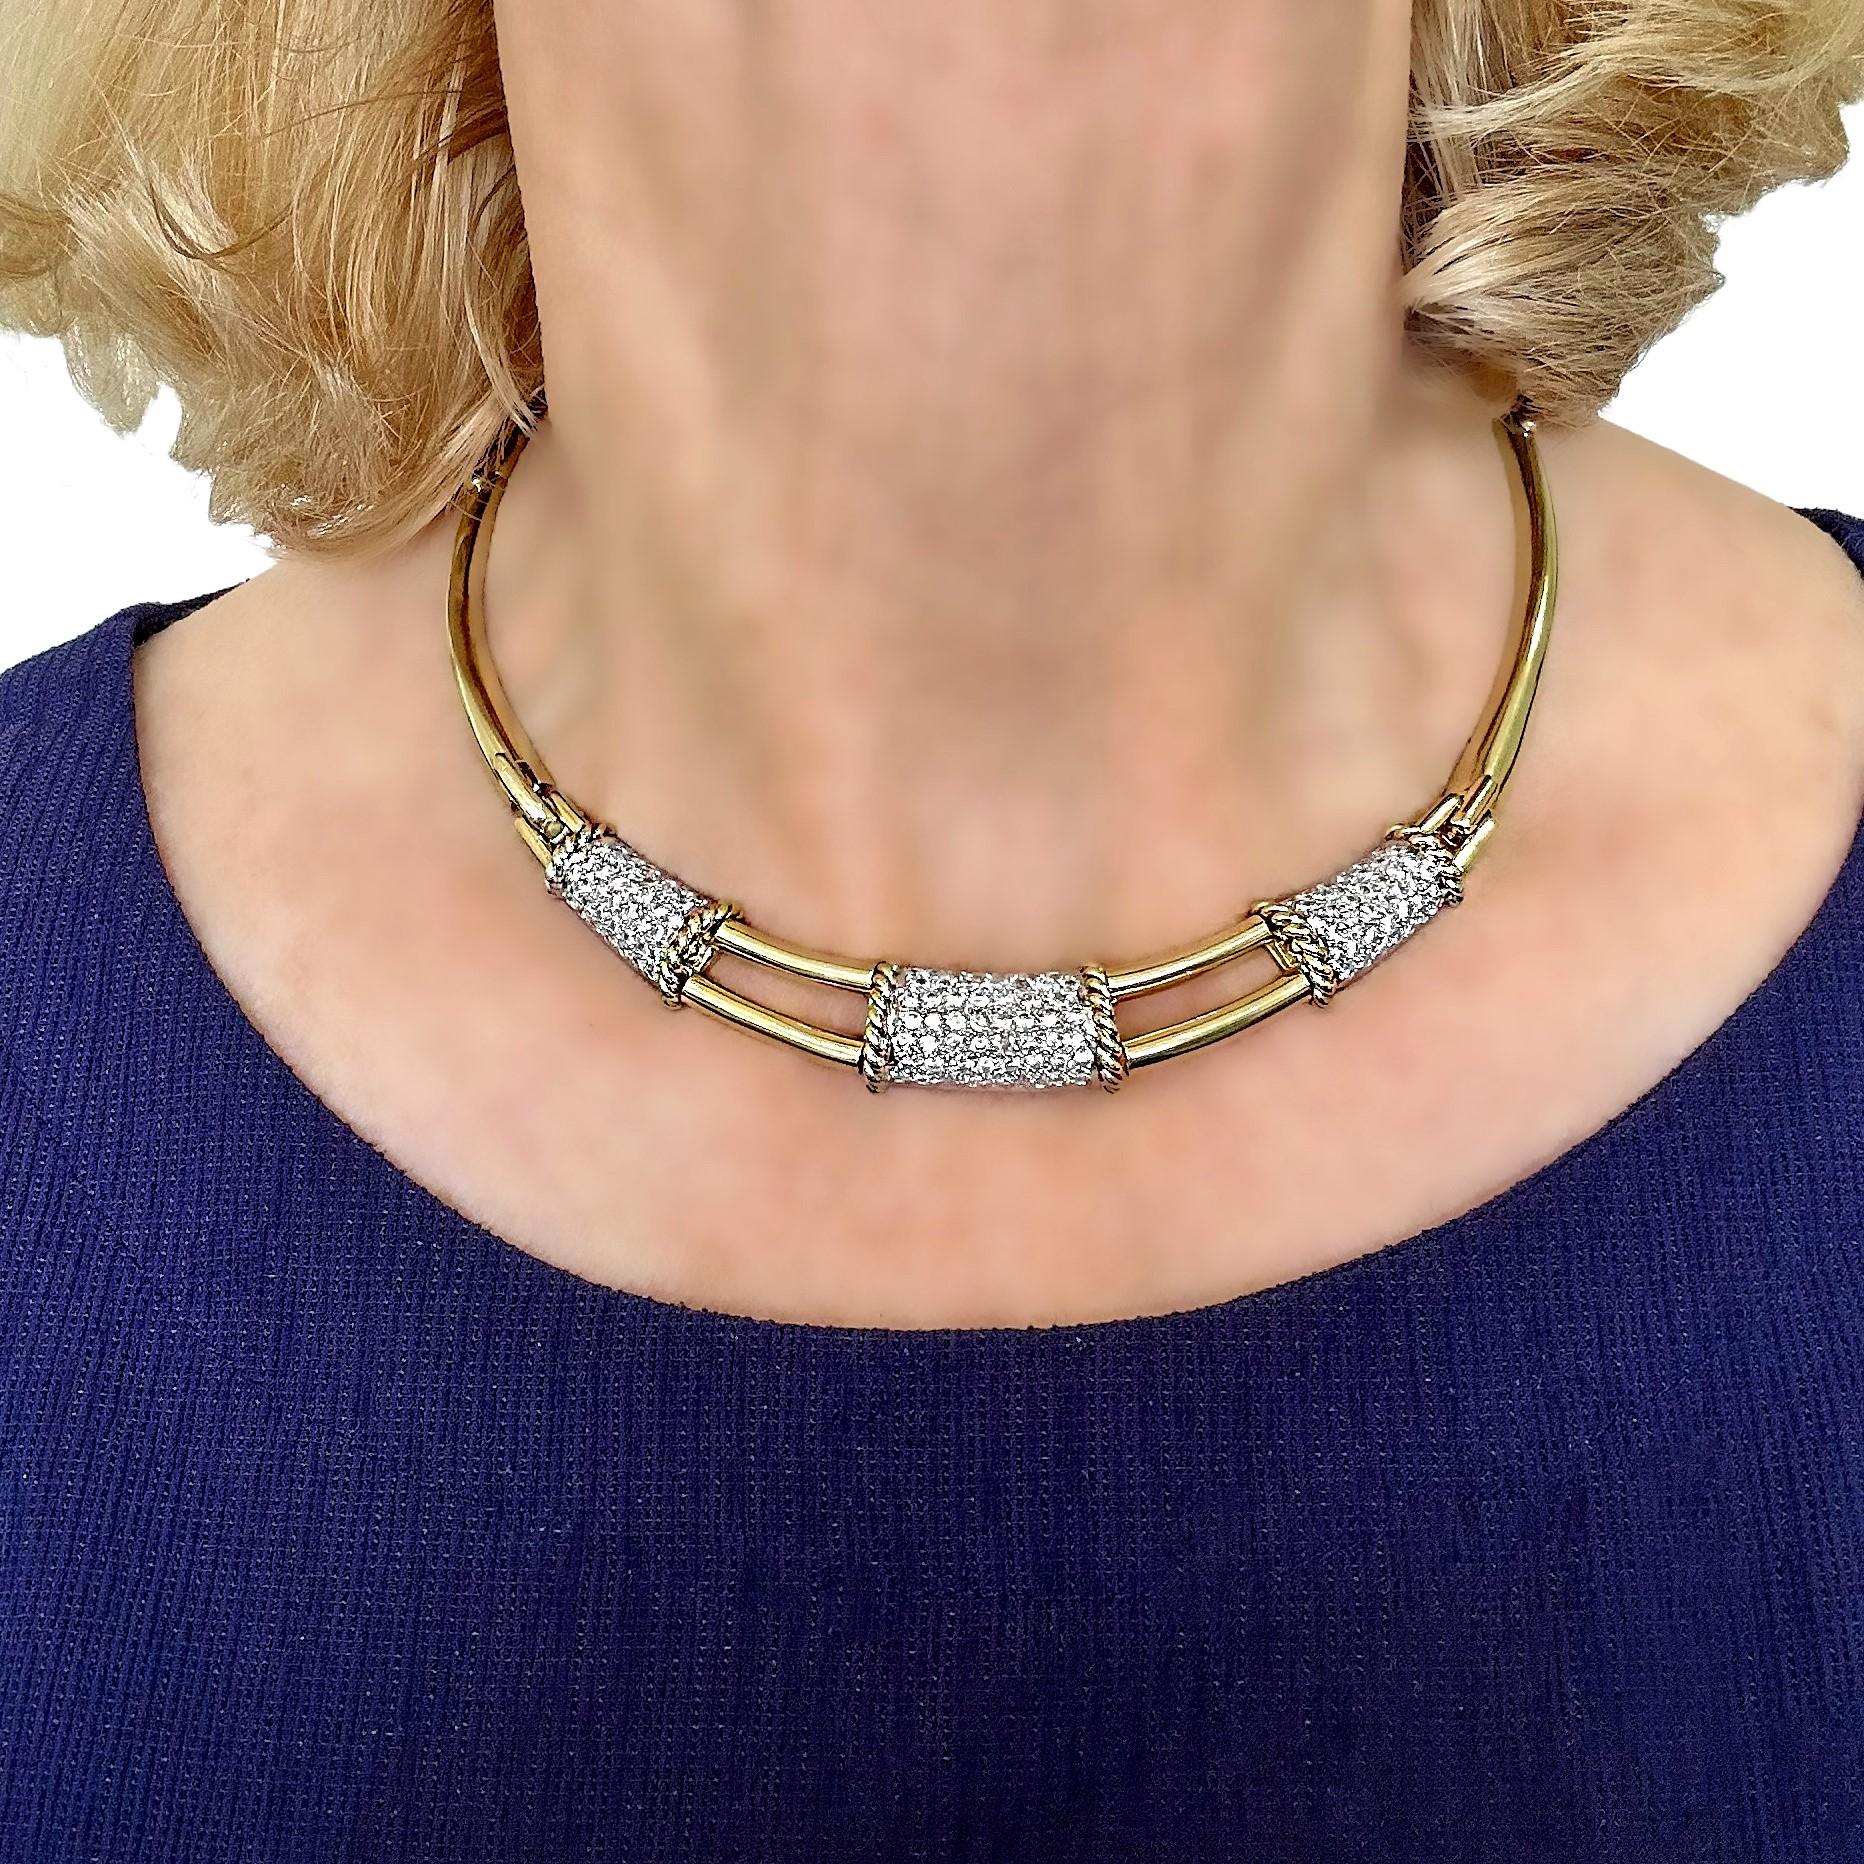 Elegant Mid-20th Century 18K Gold and Diamond Choker Necklace For Sale 3